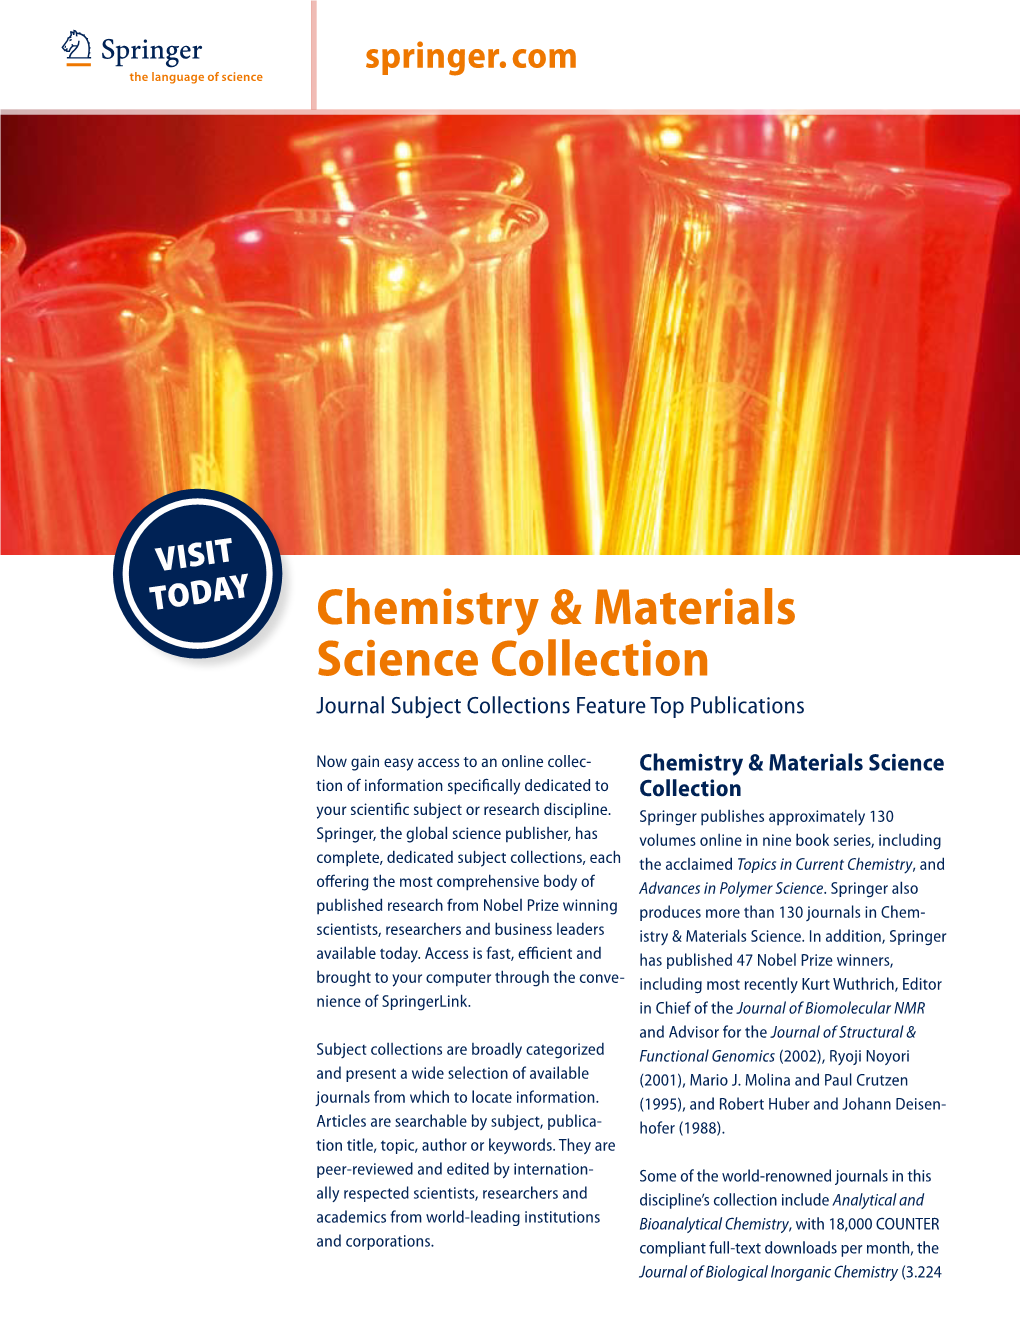 ABCD Chemistry & Materials Science Collection